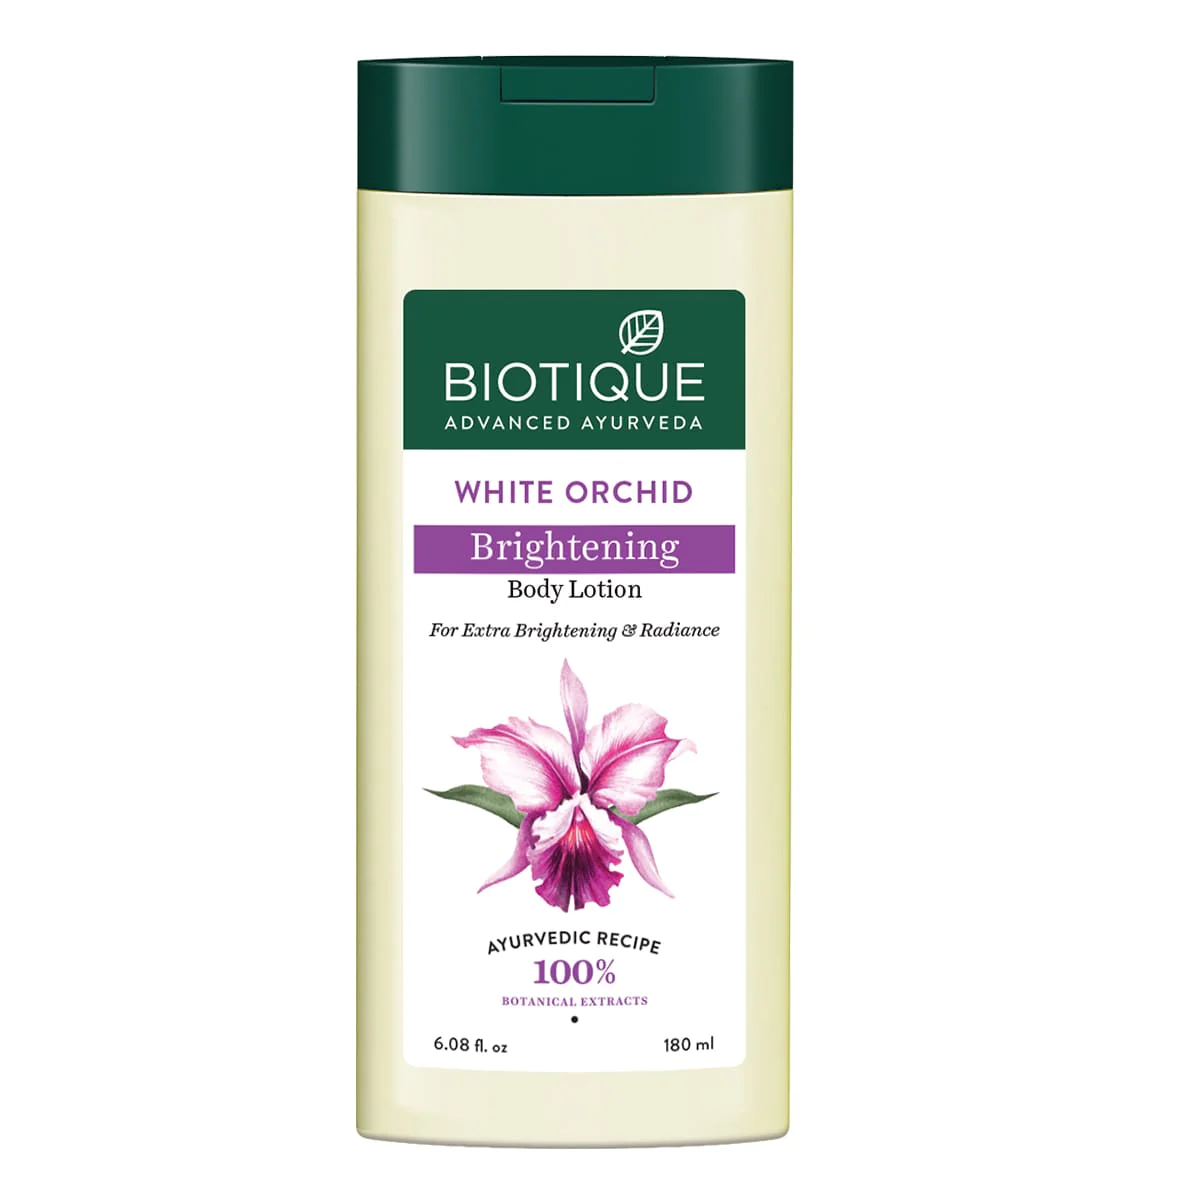 White Orchid Brightening Body Lotion For Extra Brightening & Radiance